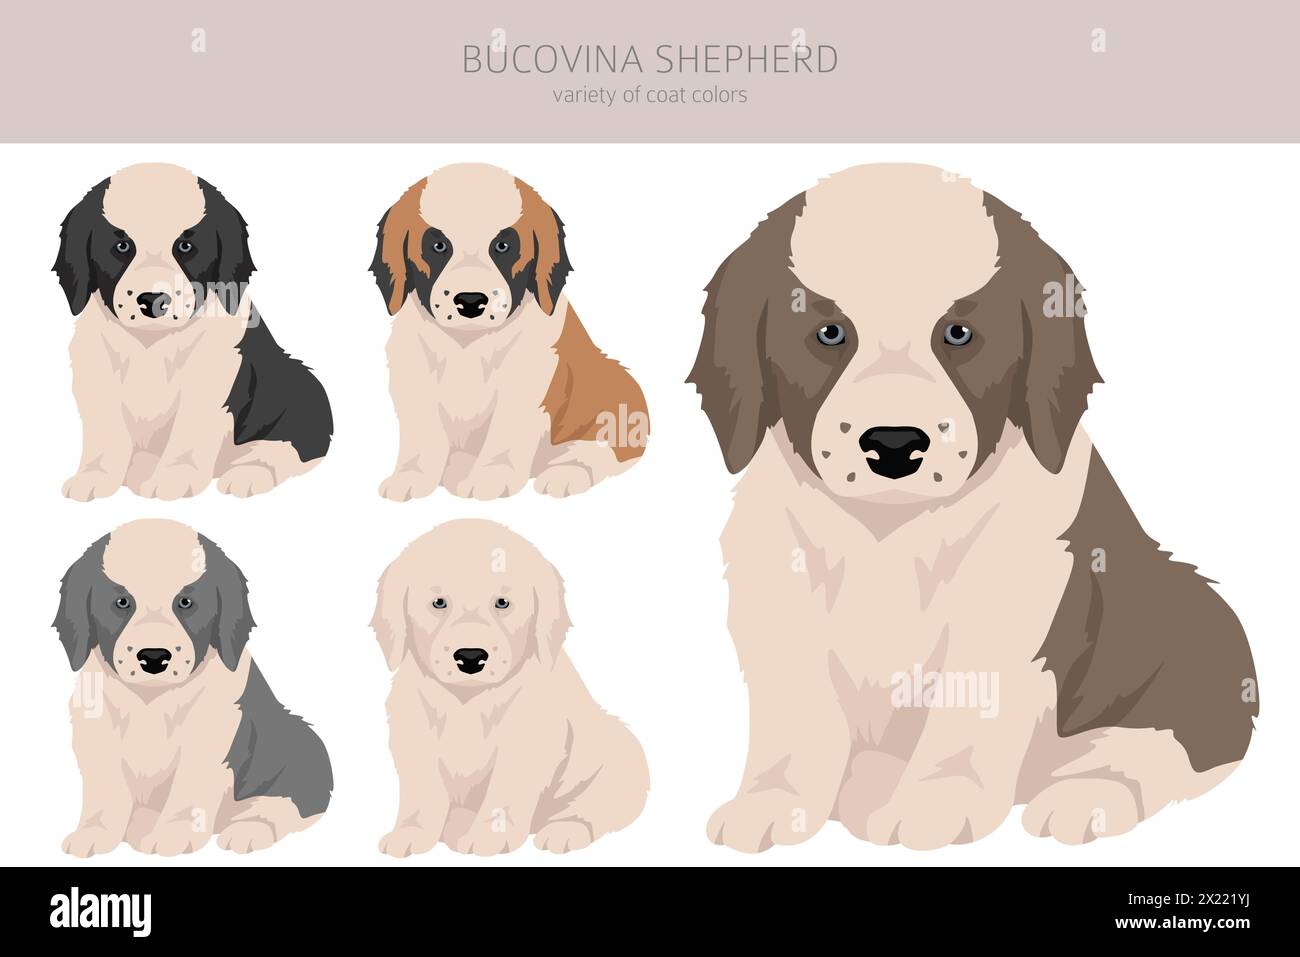 Bucovina shepherd clipart. Different coat colors and poses set.  Vector illustration Stock Vector